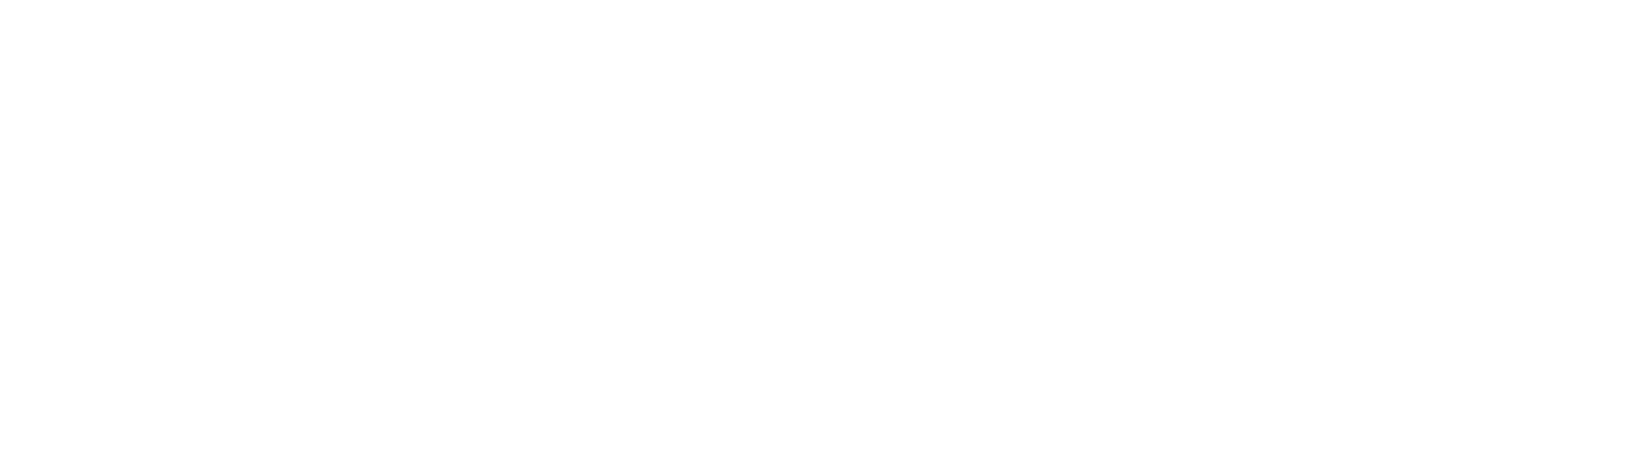 Complete Payroll - Payroll, HR, Timekeeping and HCM Solutions